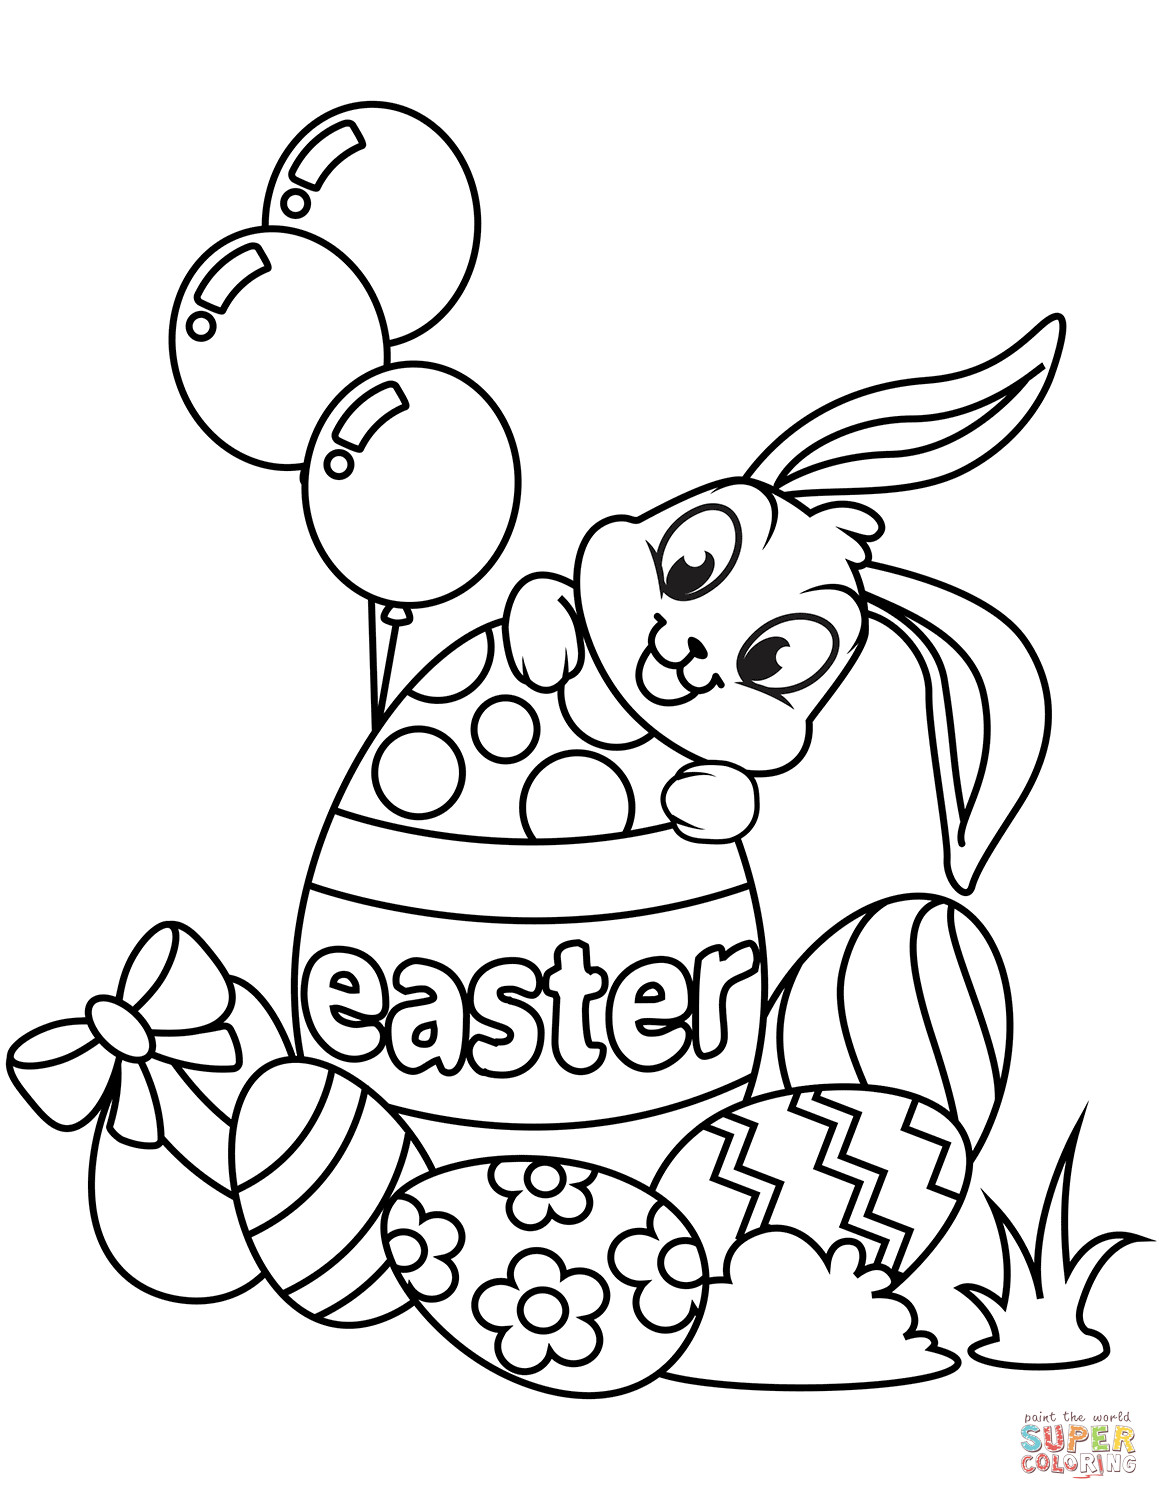 Easter Bunny Coloring Pages Free Printable
 Cute Easter Bunny and Eggs coloring page